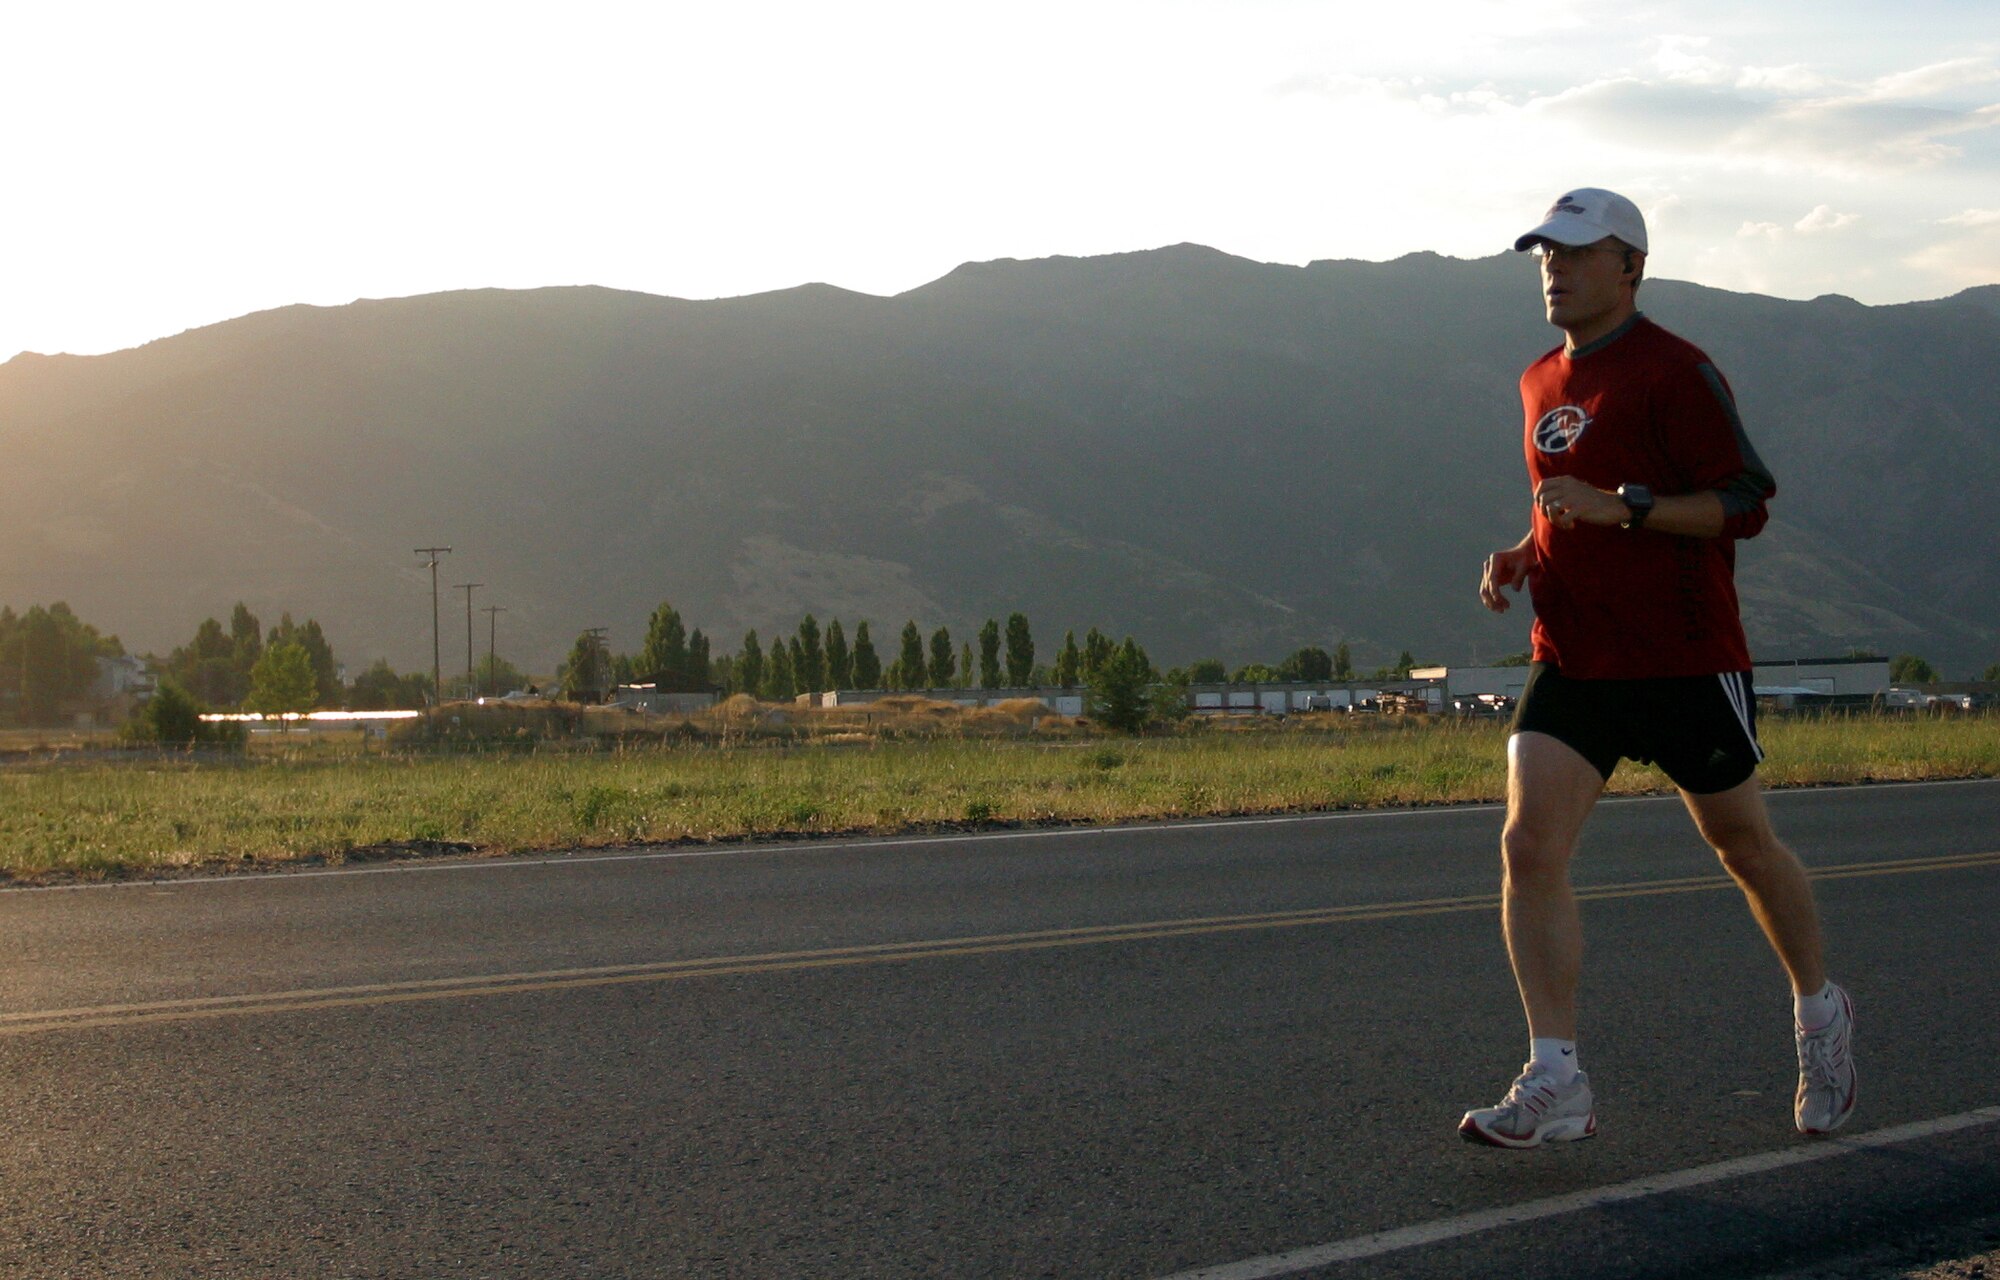 Capt. Harrison in a five mile run before his second marathon event in the "Grand Slam," a four-marathon event that takes place over five months.  "Some wouldn't think running is relaxing, but to me it is," said Captain Harrison. (U.S. Air Force Photo by Senior Airman Daniel Durbin)